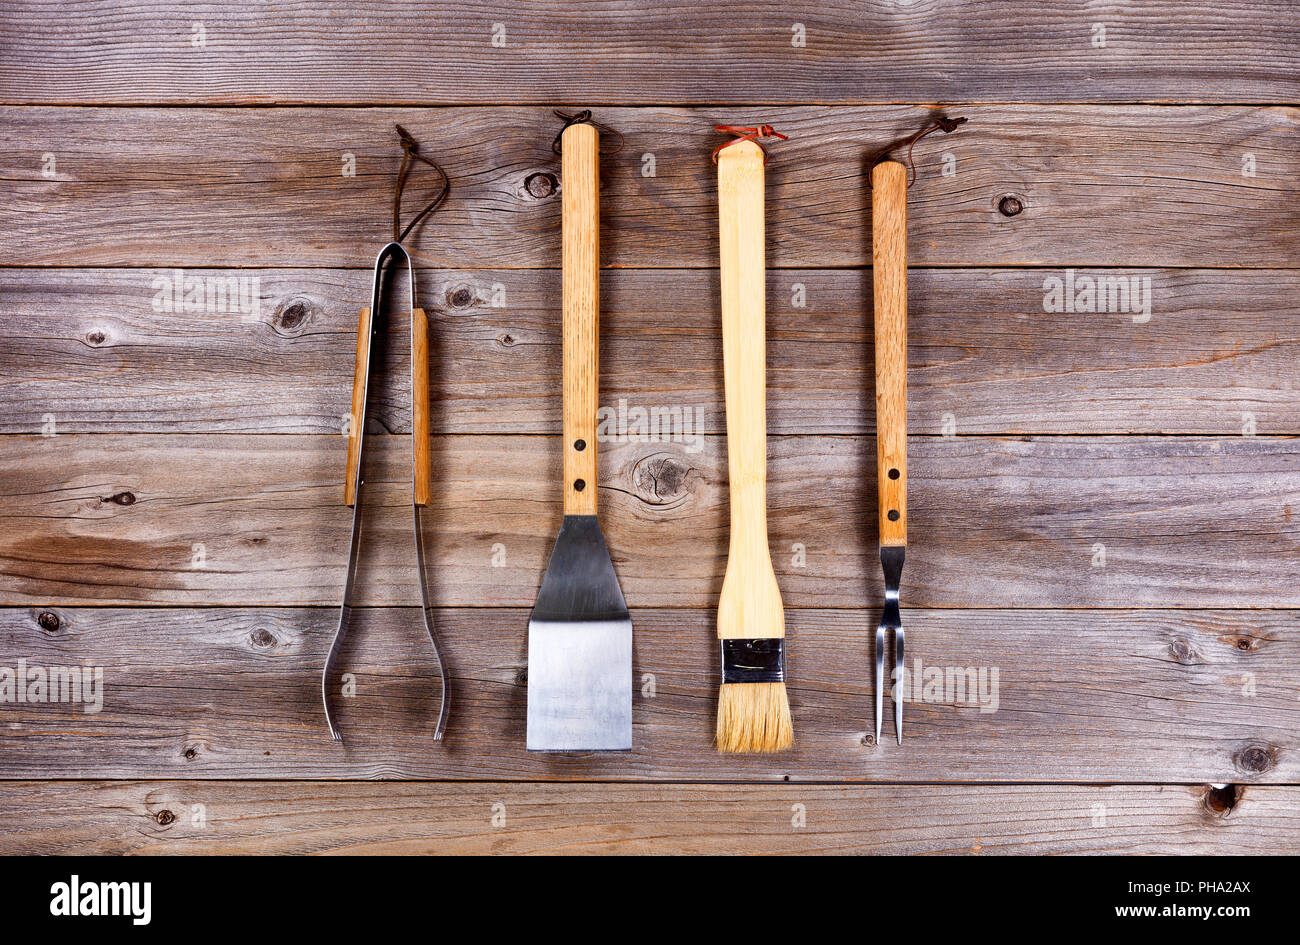 Used kitchenware for barbecue cooking on rustic wood Stock Photo